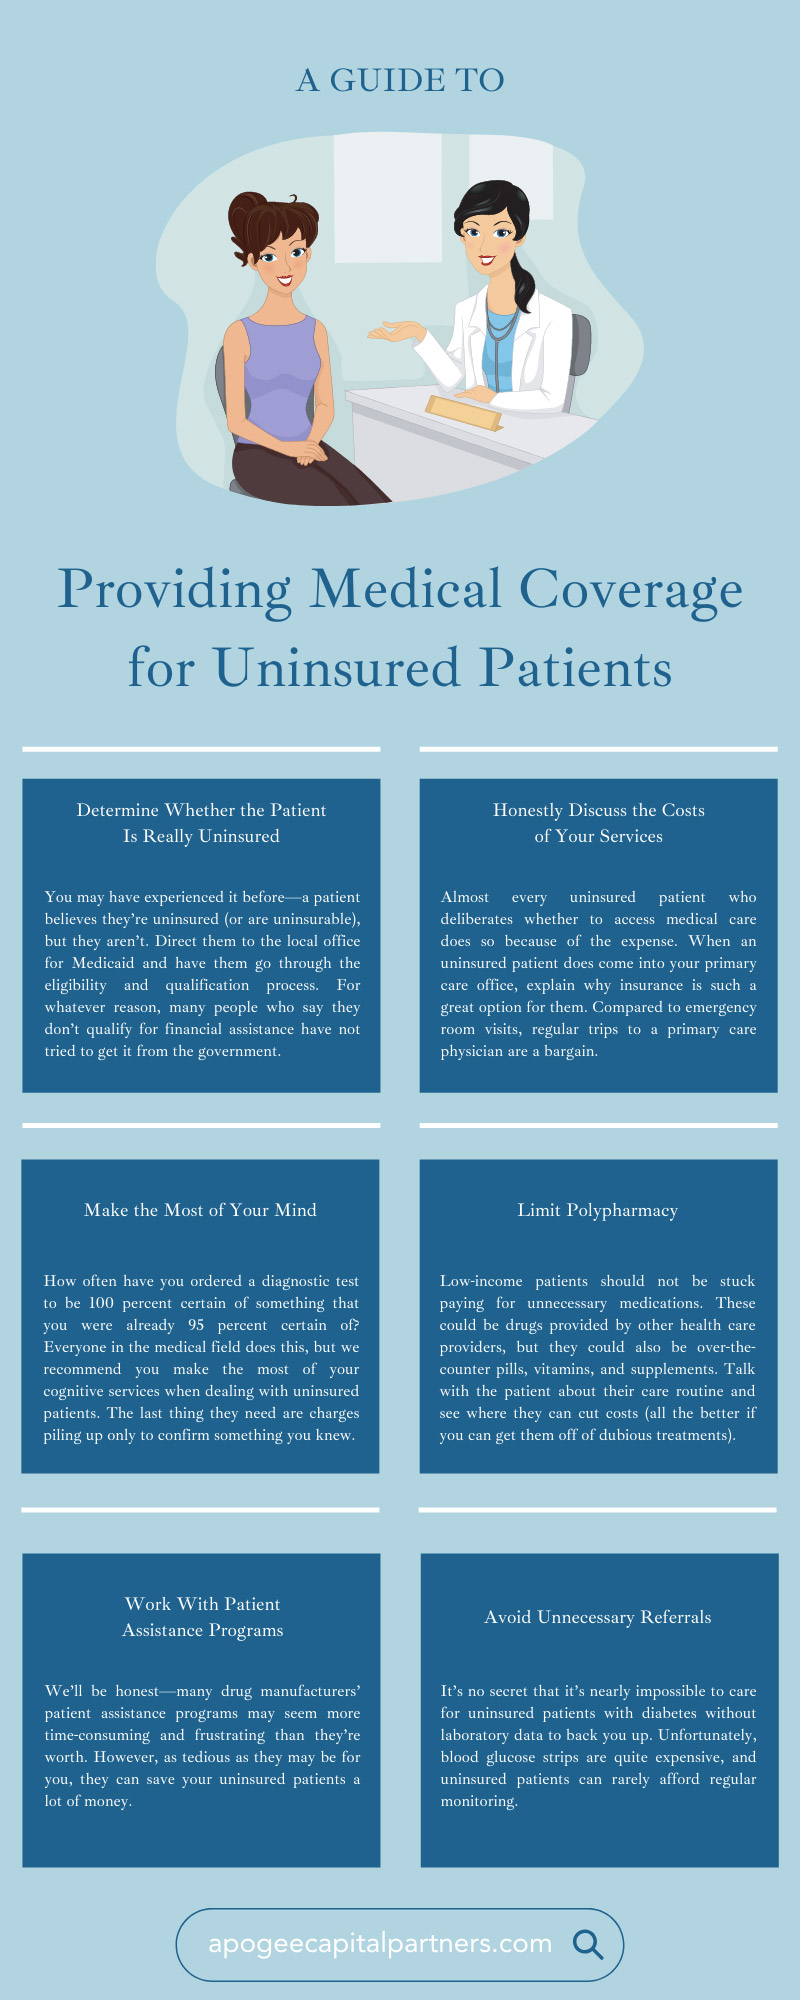 A Guide To Providing Medical Coverage for Uninsured Patients